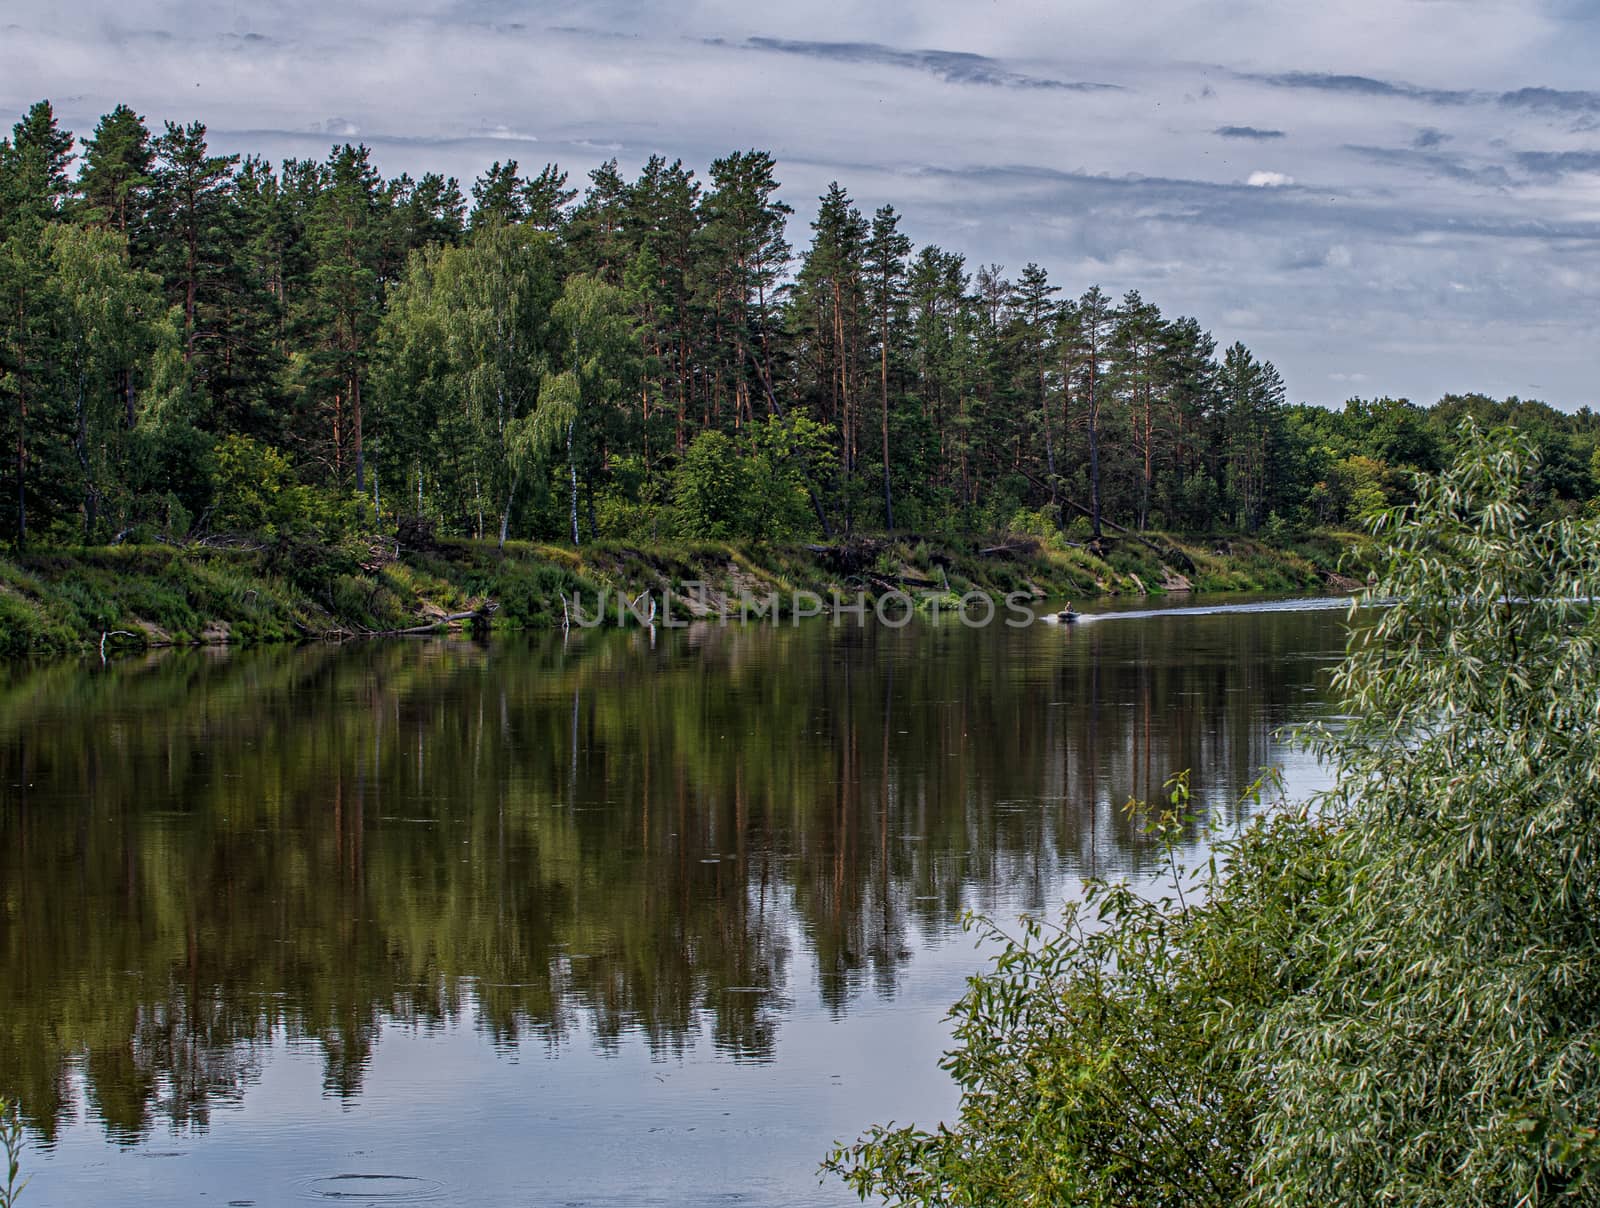 calm plain river among the banks covered with forest under a cloudy sky